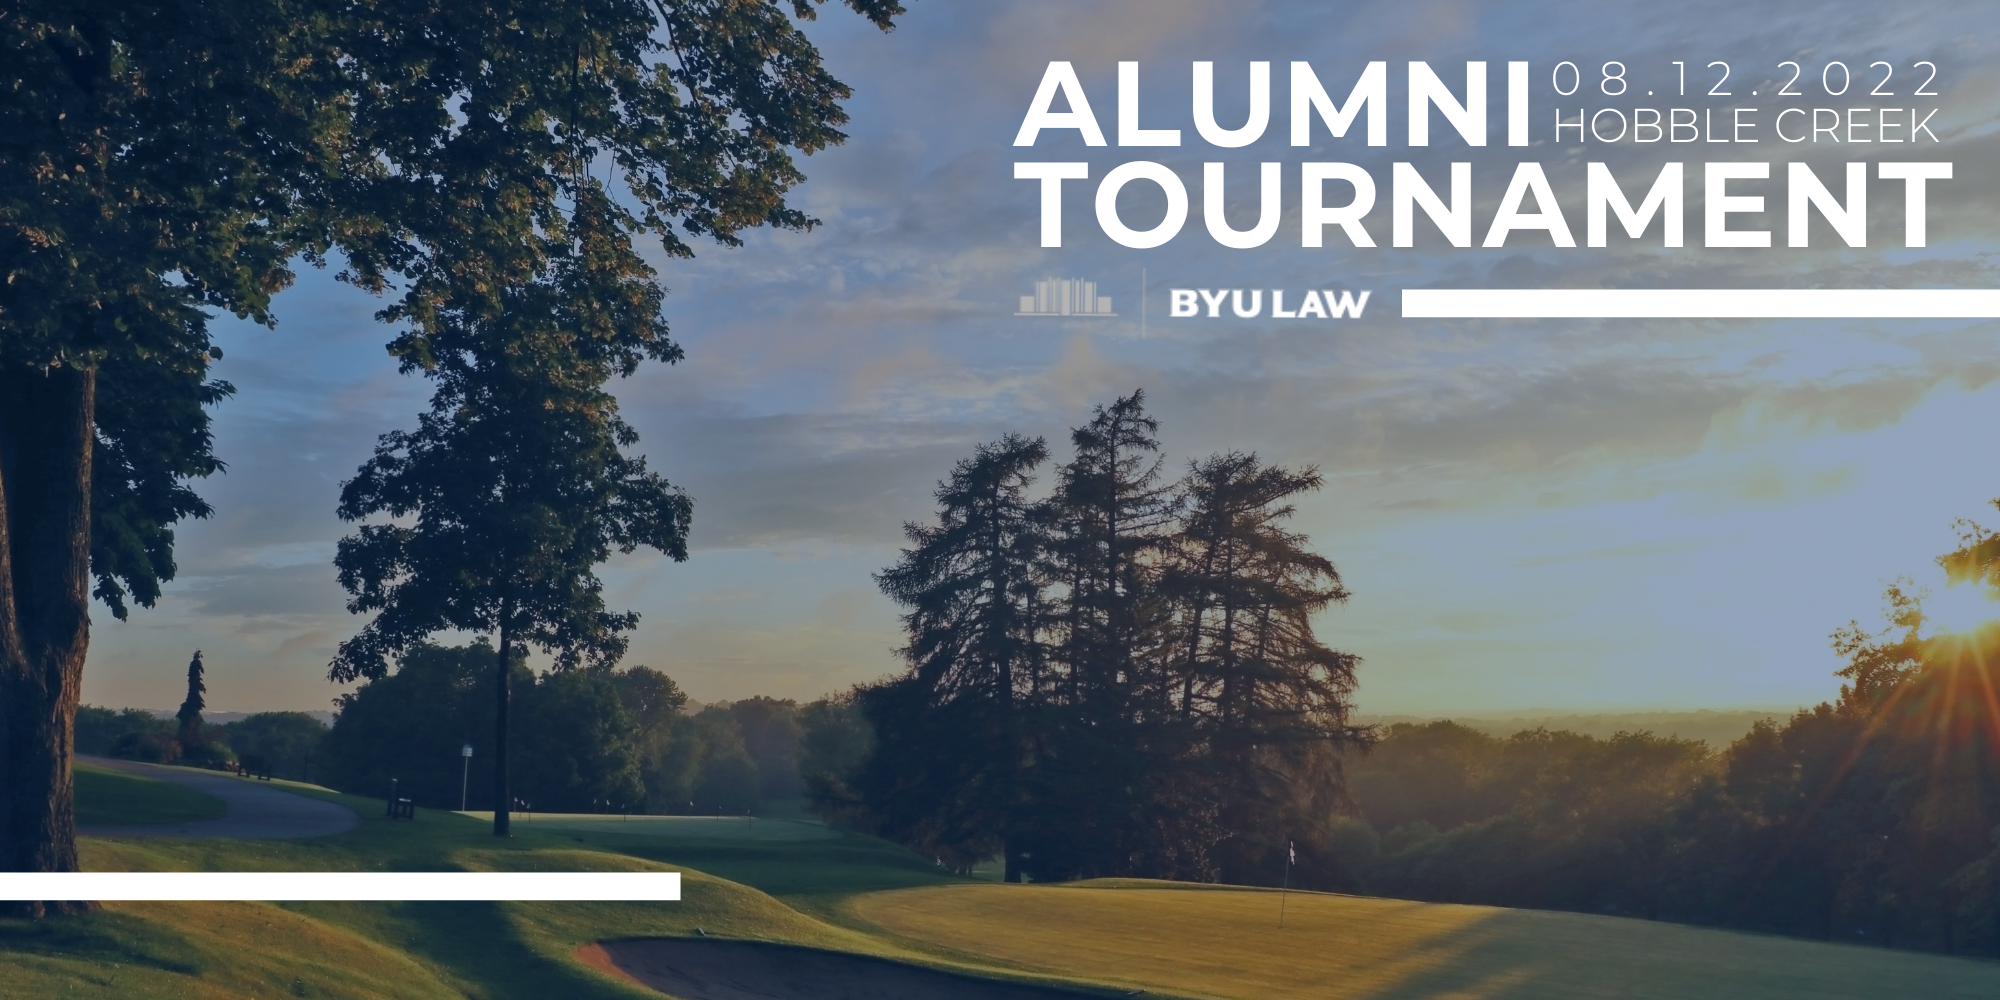 BYU Law Alumni Golf Tournament | 2022 Foursomes and Sponsor Packages